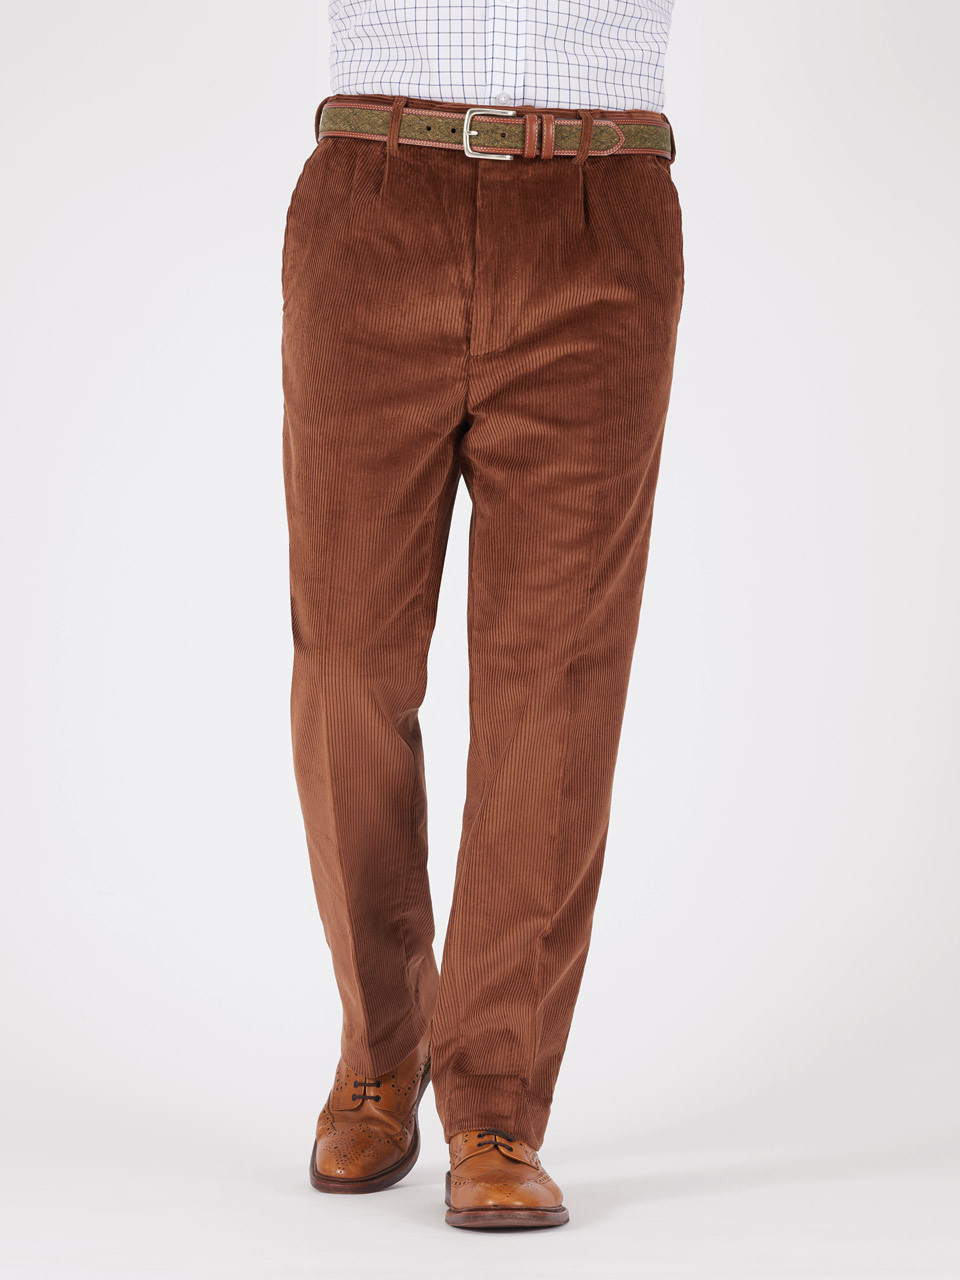 Burgundy Red County Corduroy Trousers | Peter Christian